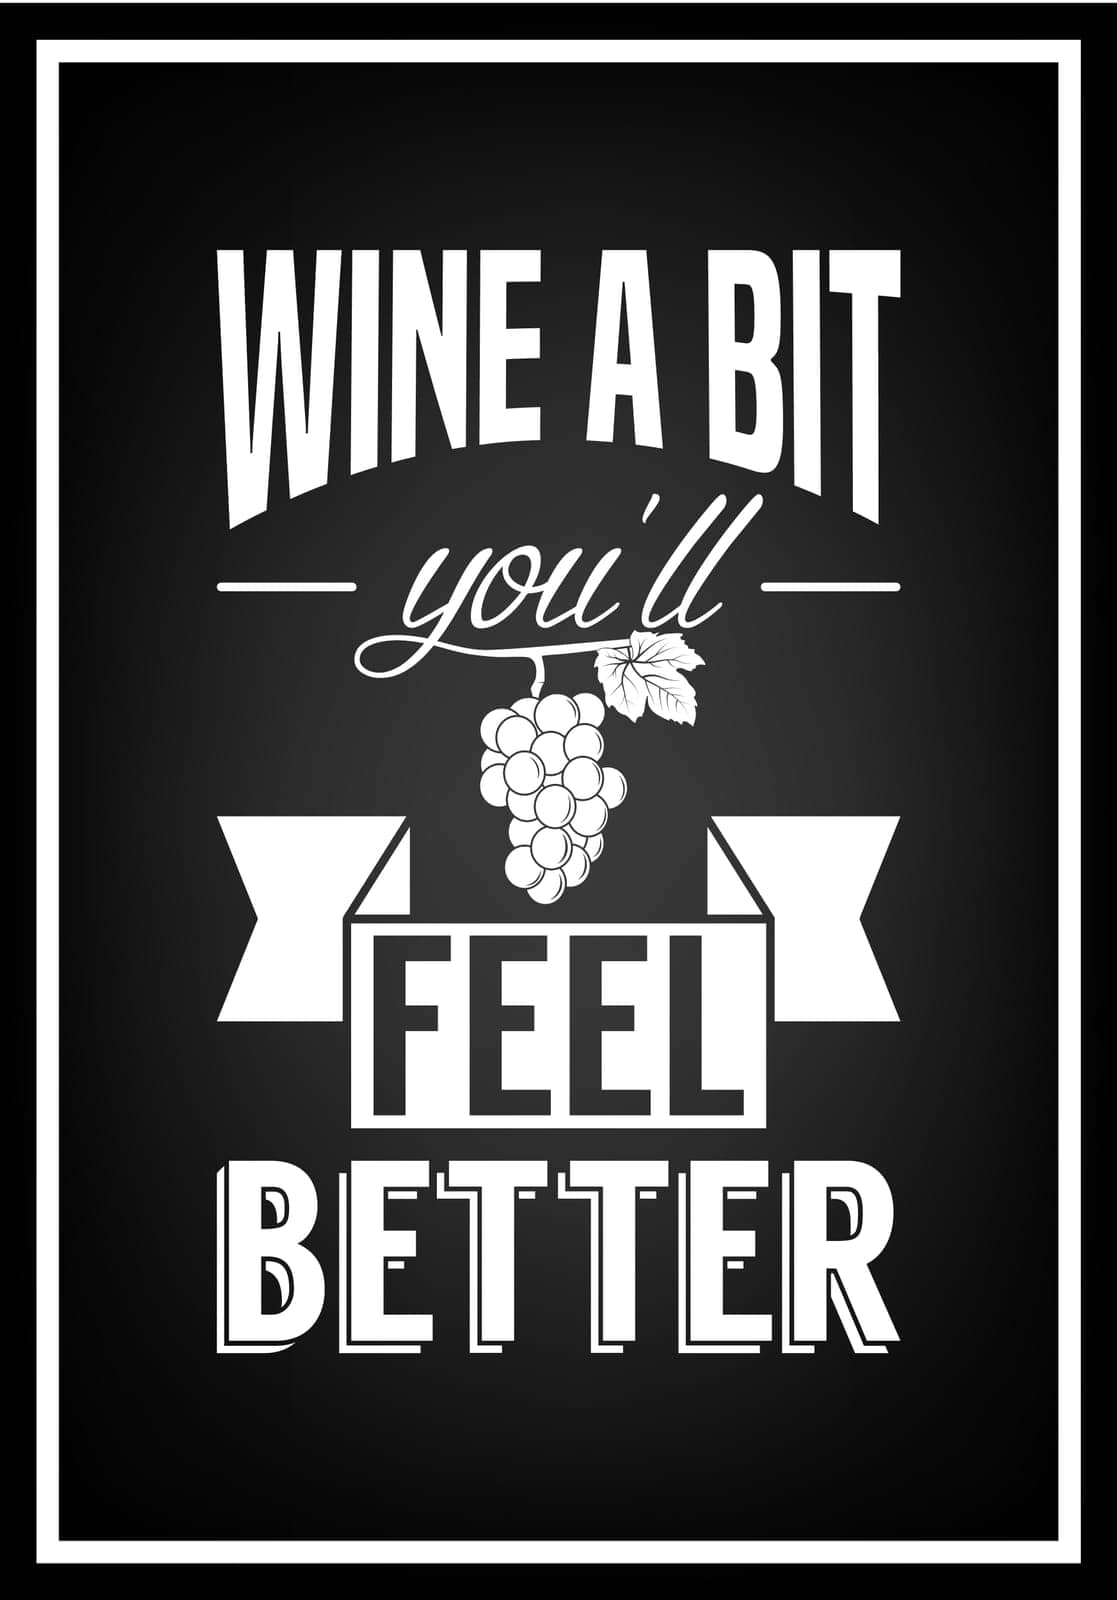 Wine a bit, you ll feel better - Quote Typographical Background. Vector EPS8 illustration.